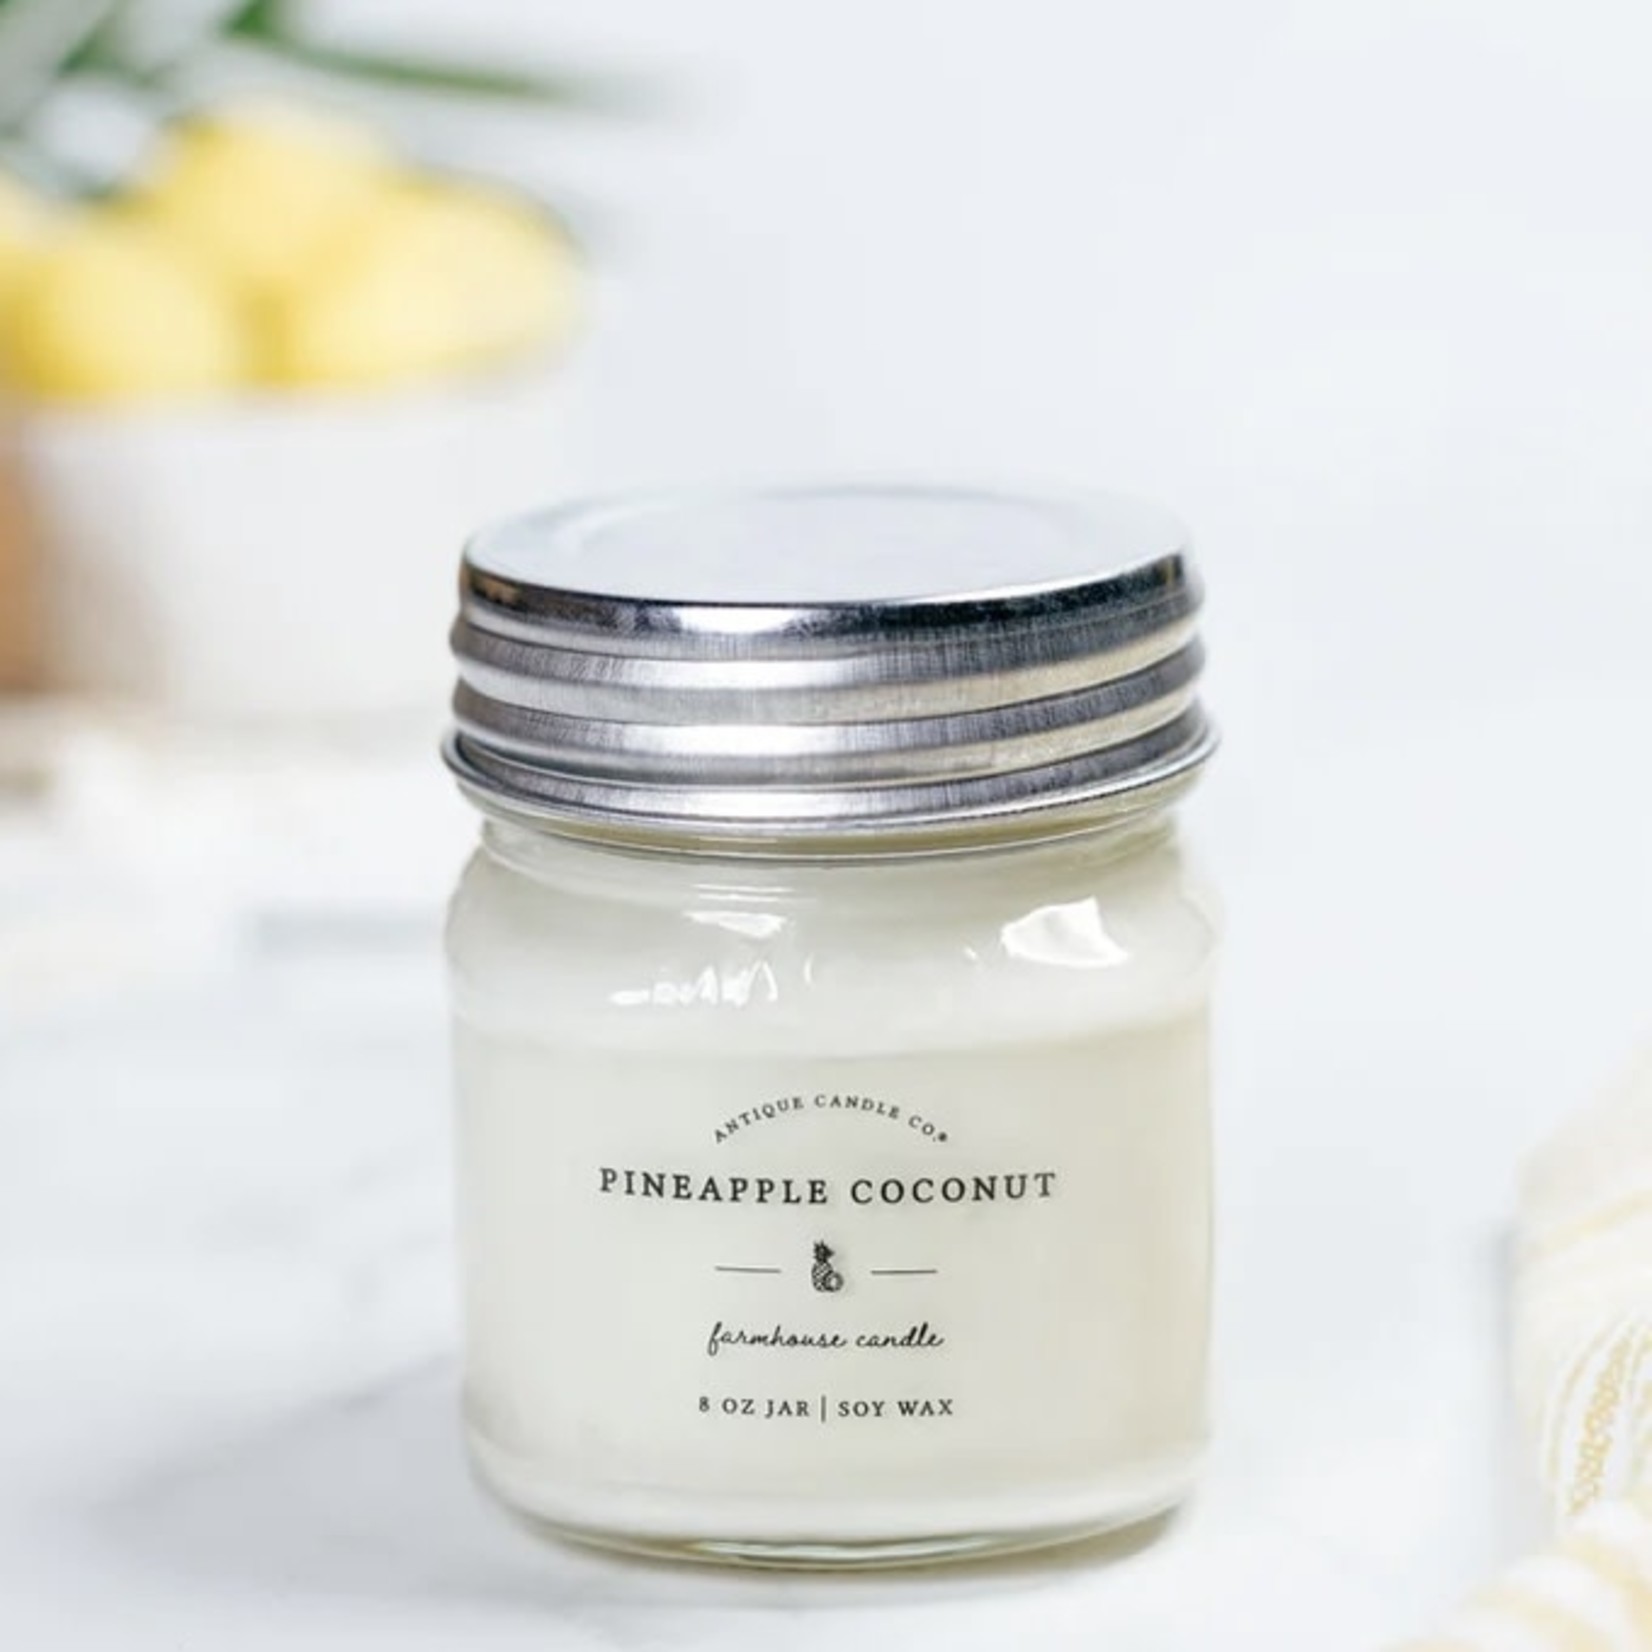 Pineapple Coconut by Antique Candle Co.  /  8 oz